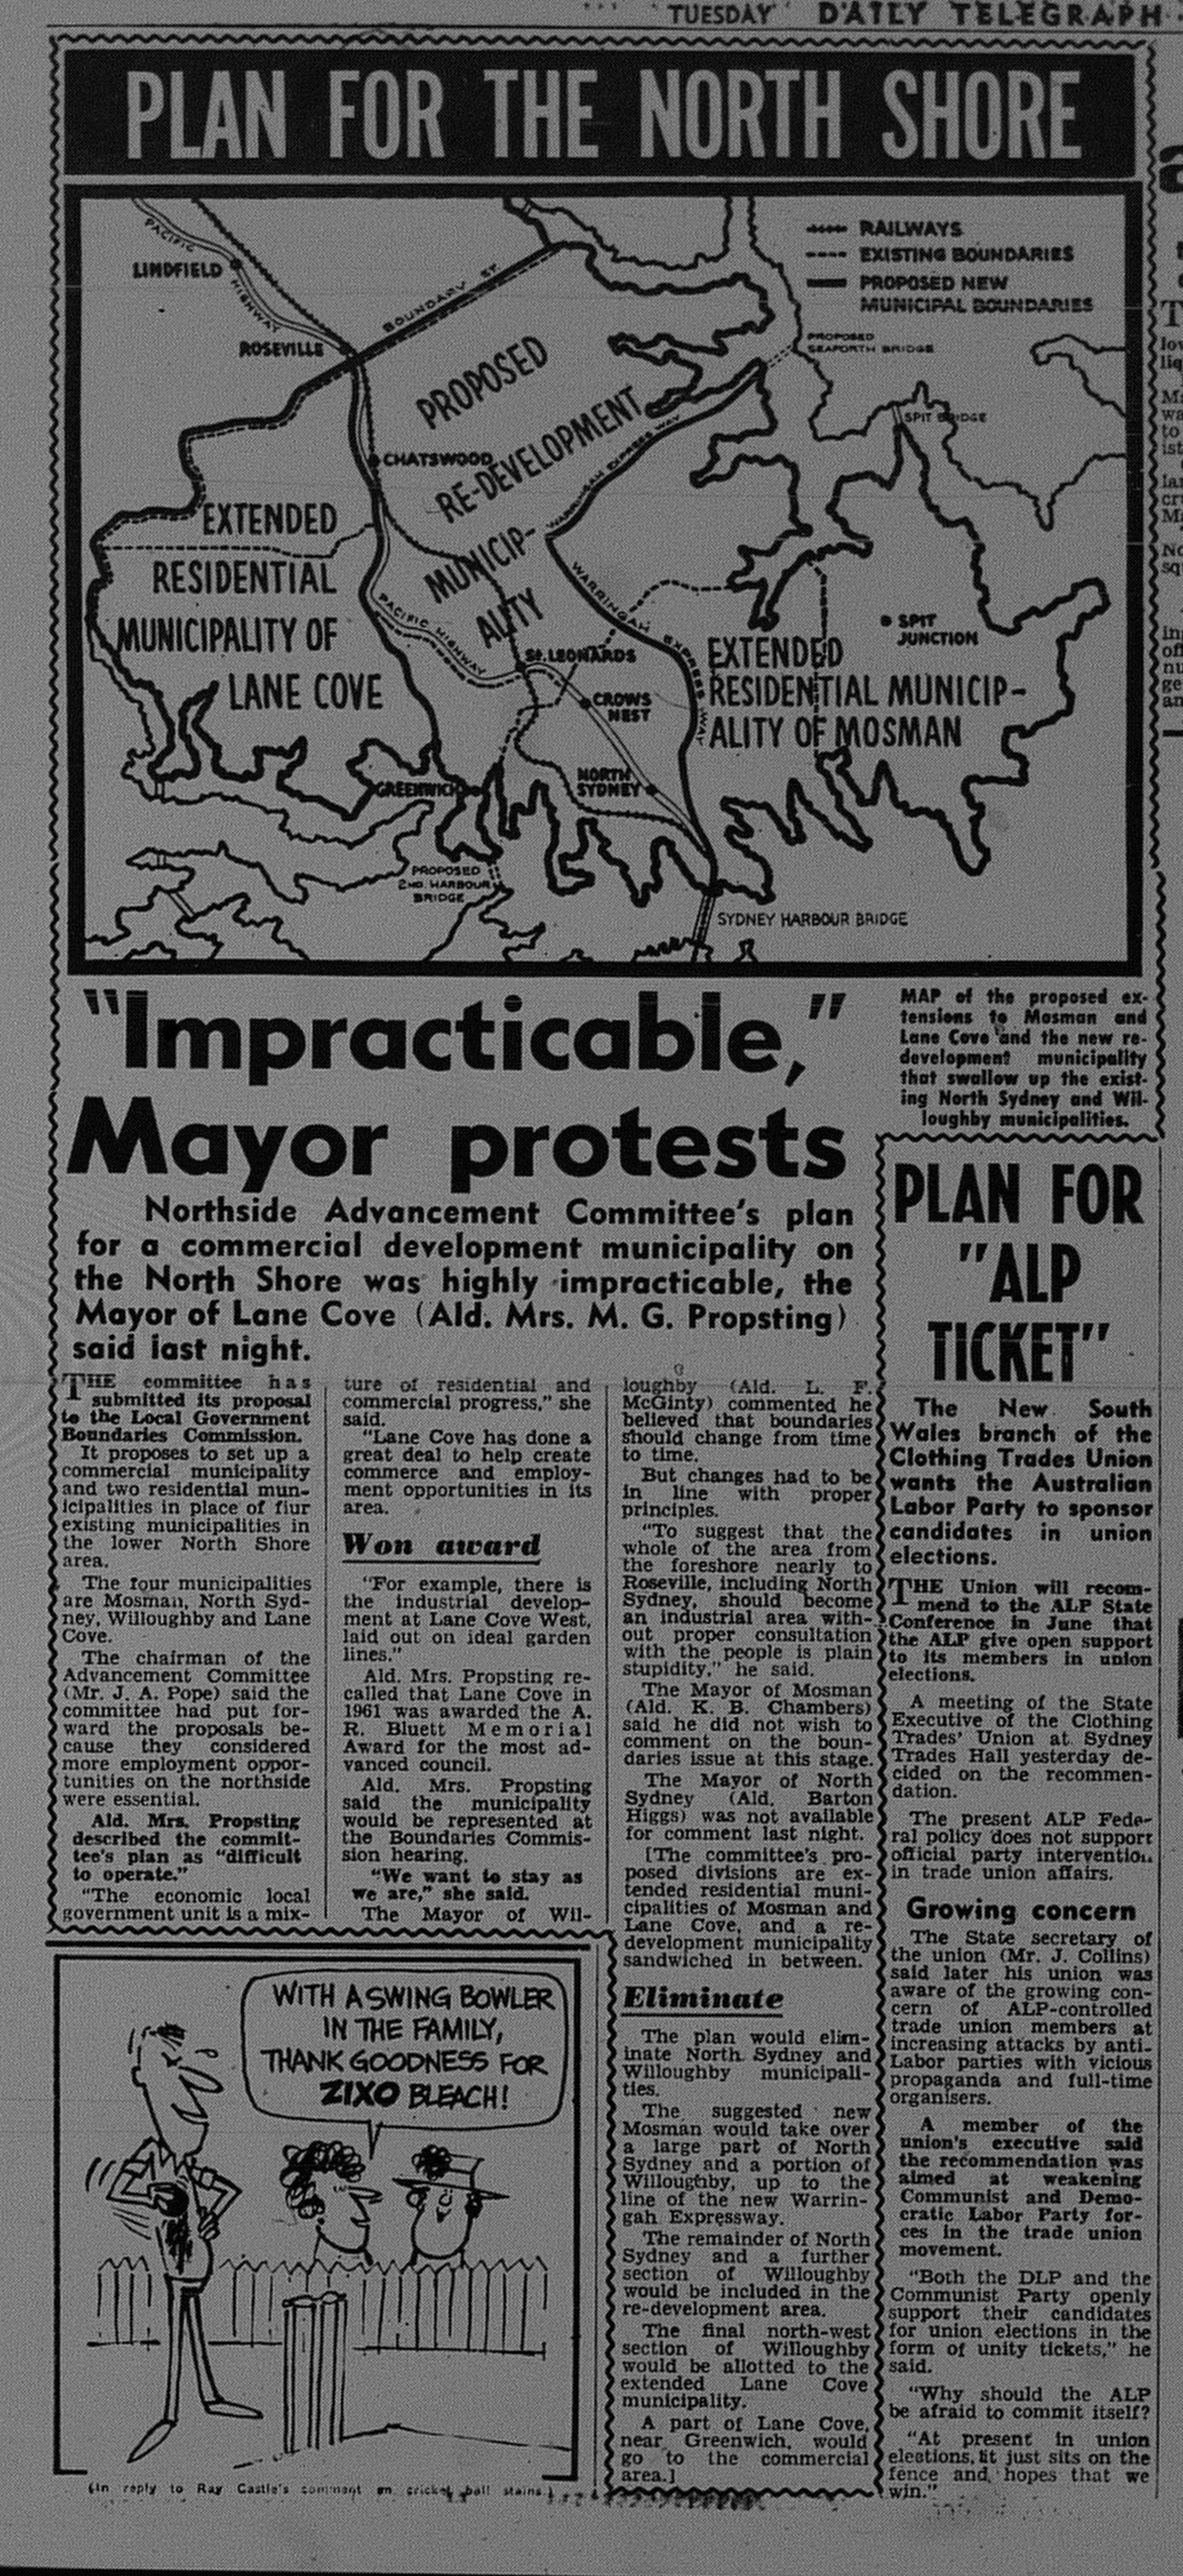 North Shore Council Merger February 4 1964 daily telegraph 7